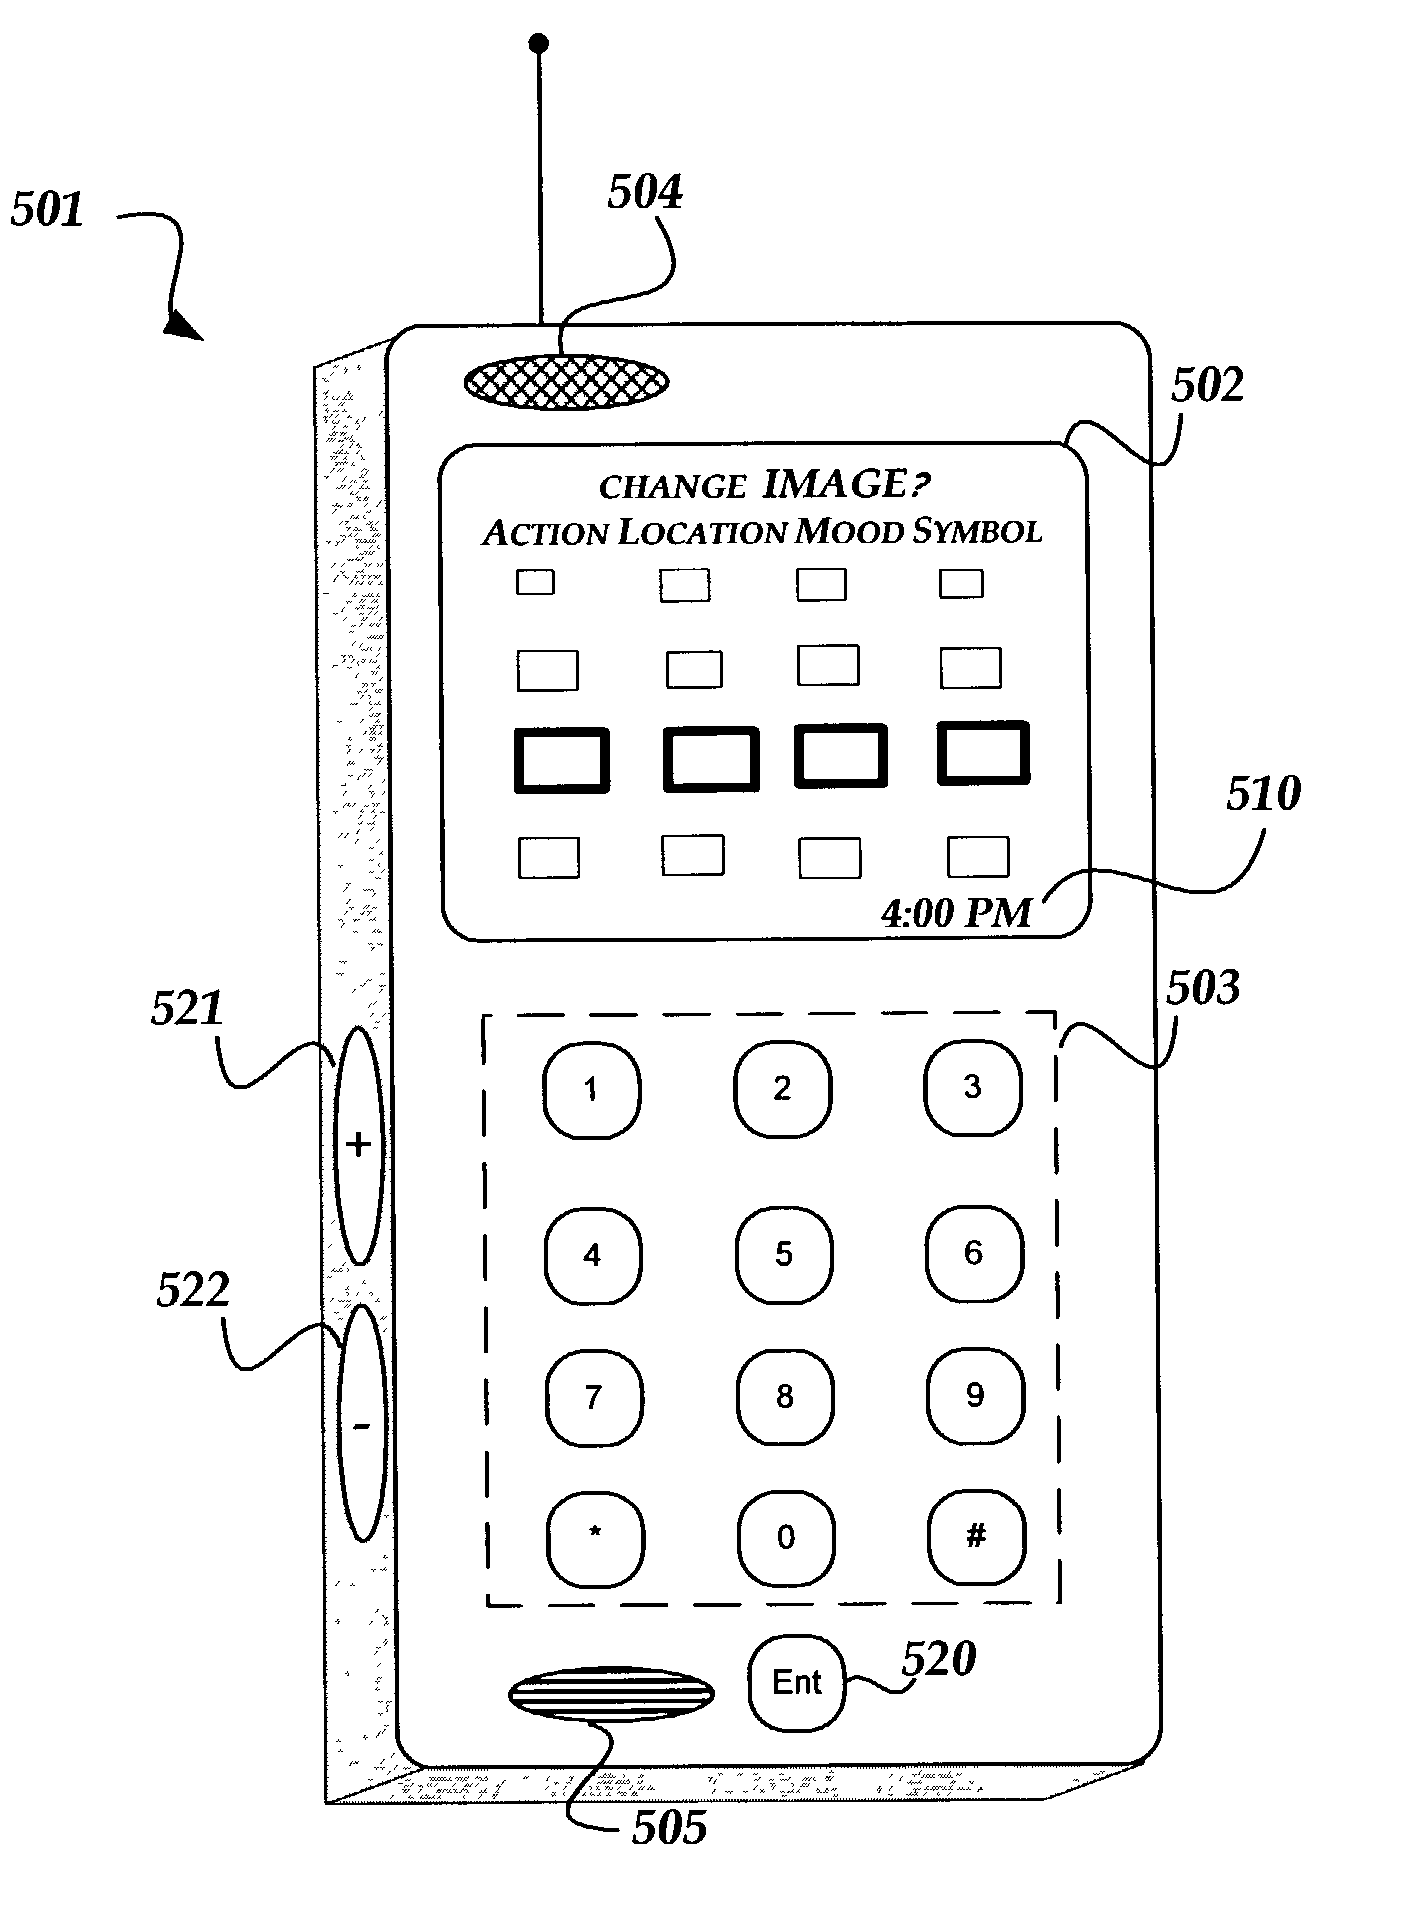 Wireless mobile image messaging